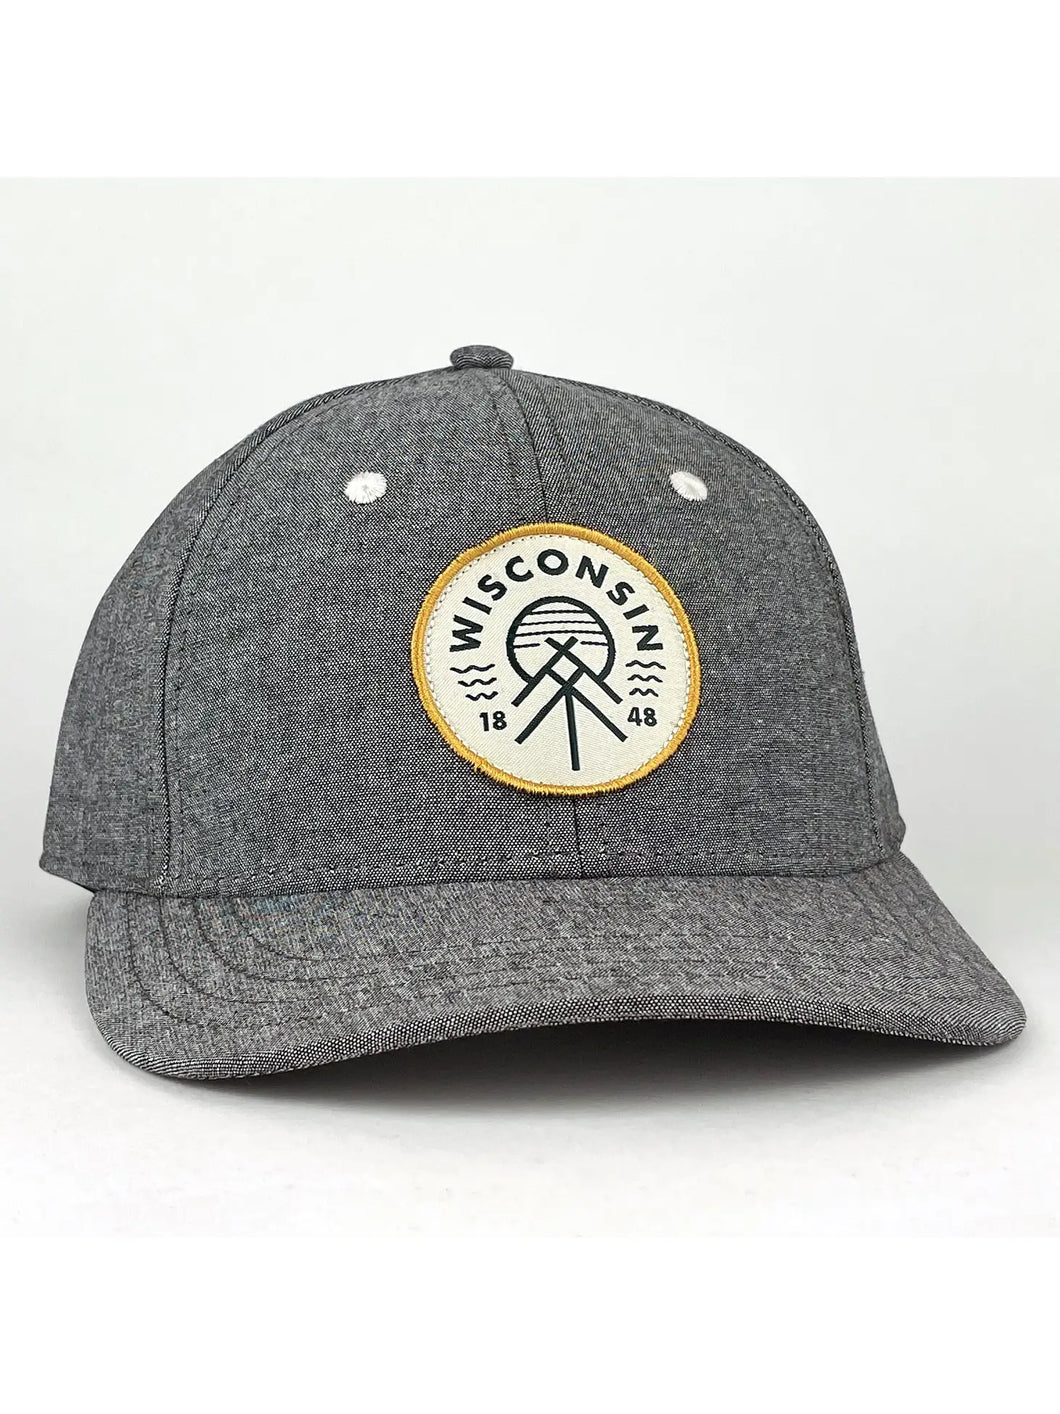 The Wisconsin Native Chambray Hat